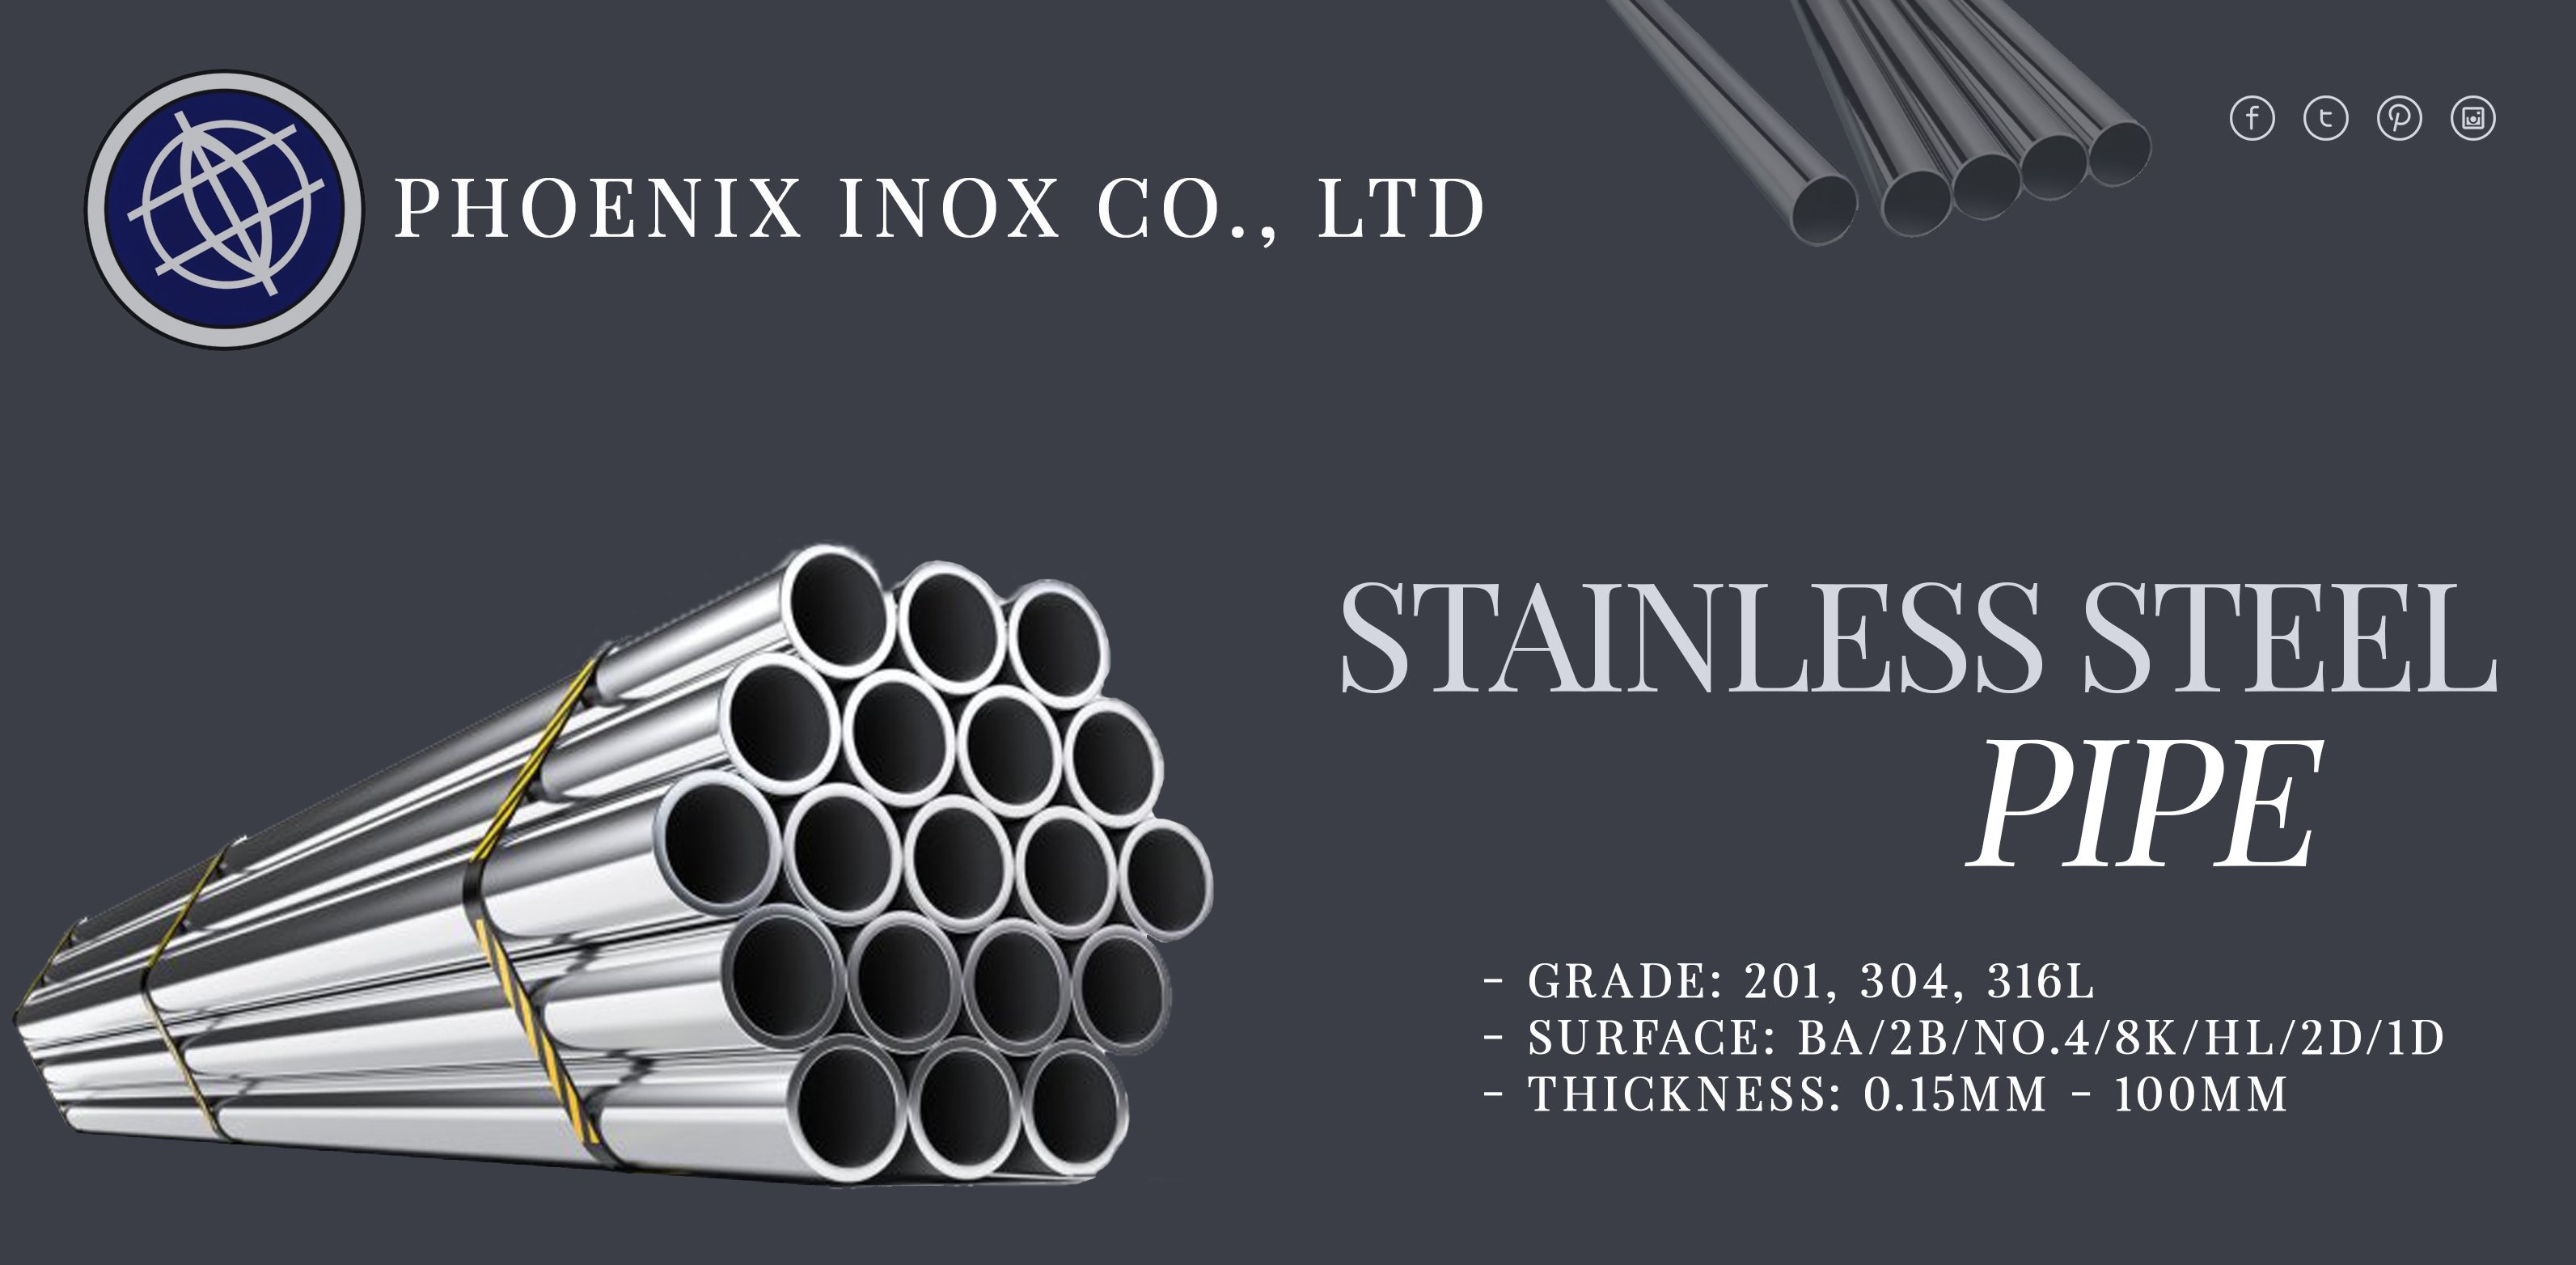 WE SPECIALIZE IN STAINLESS STEEL CIRCLES & PIPES